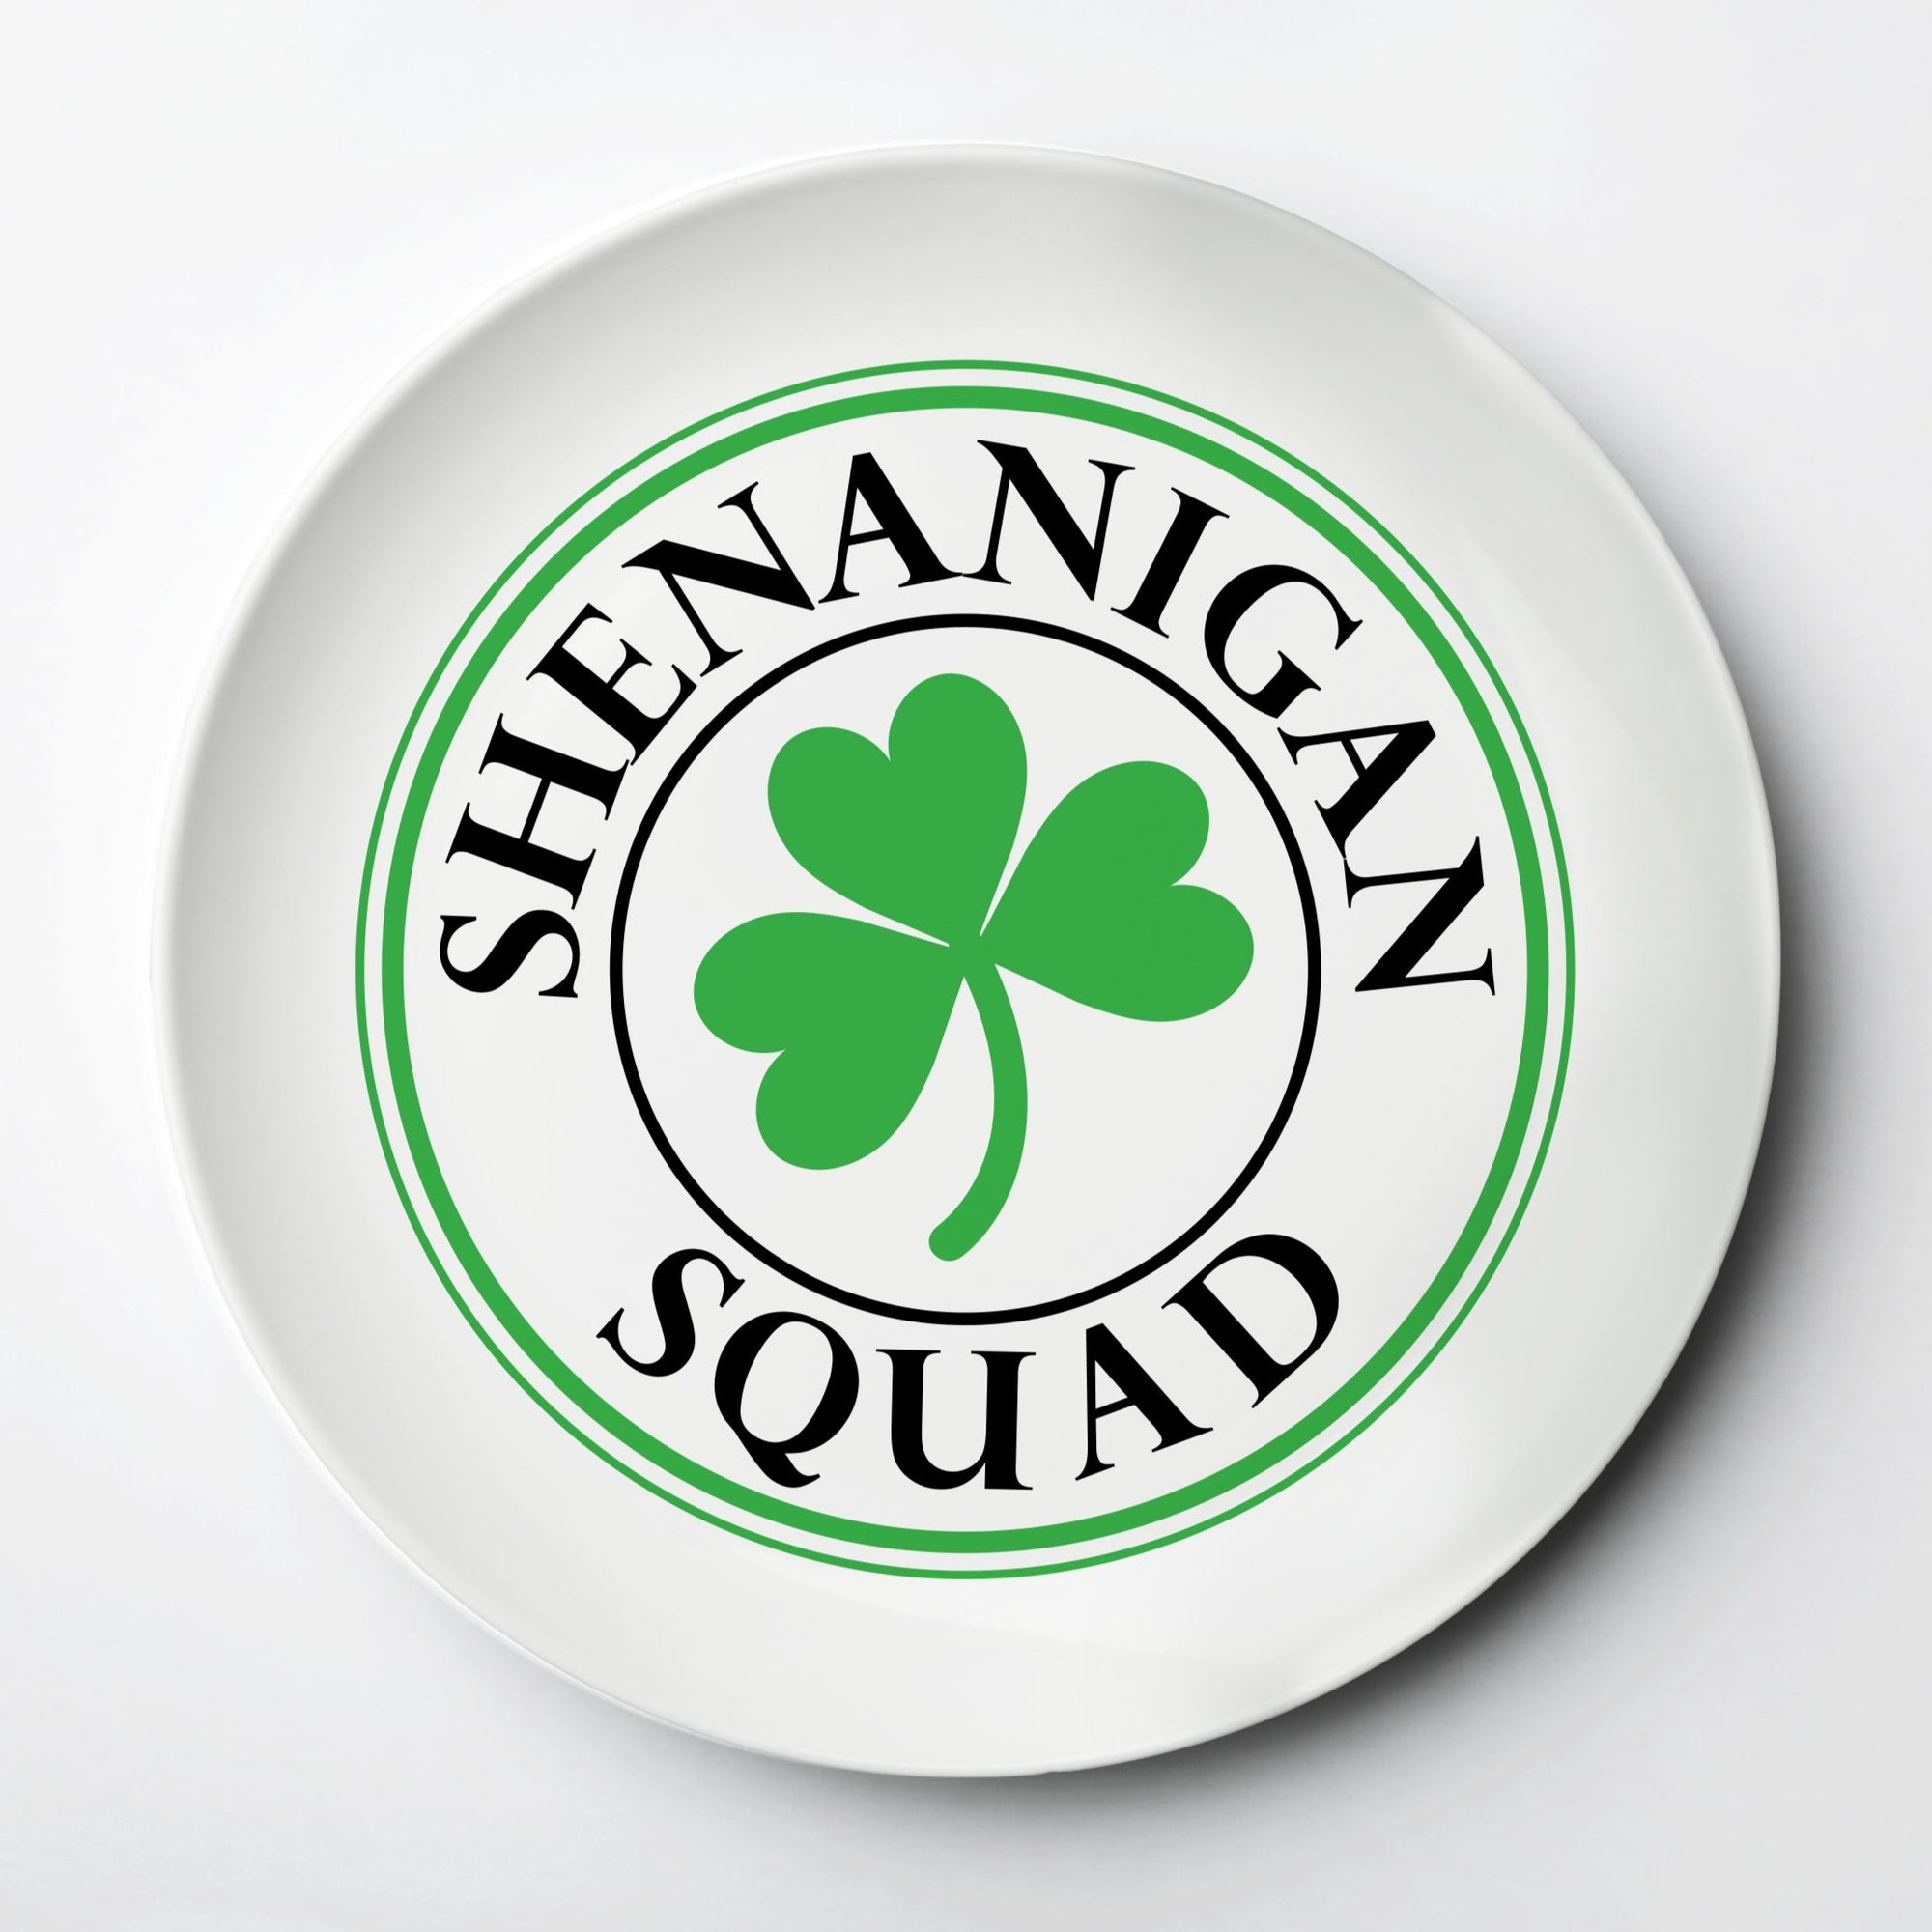 Shenanigan Squad ThermoSāf® kids reusable plate, microwave, dishwasher and oven safe.  Made in the USA, Pipsy.com